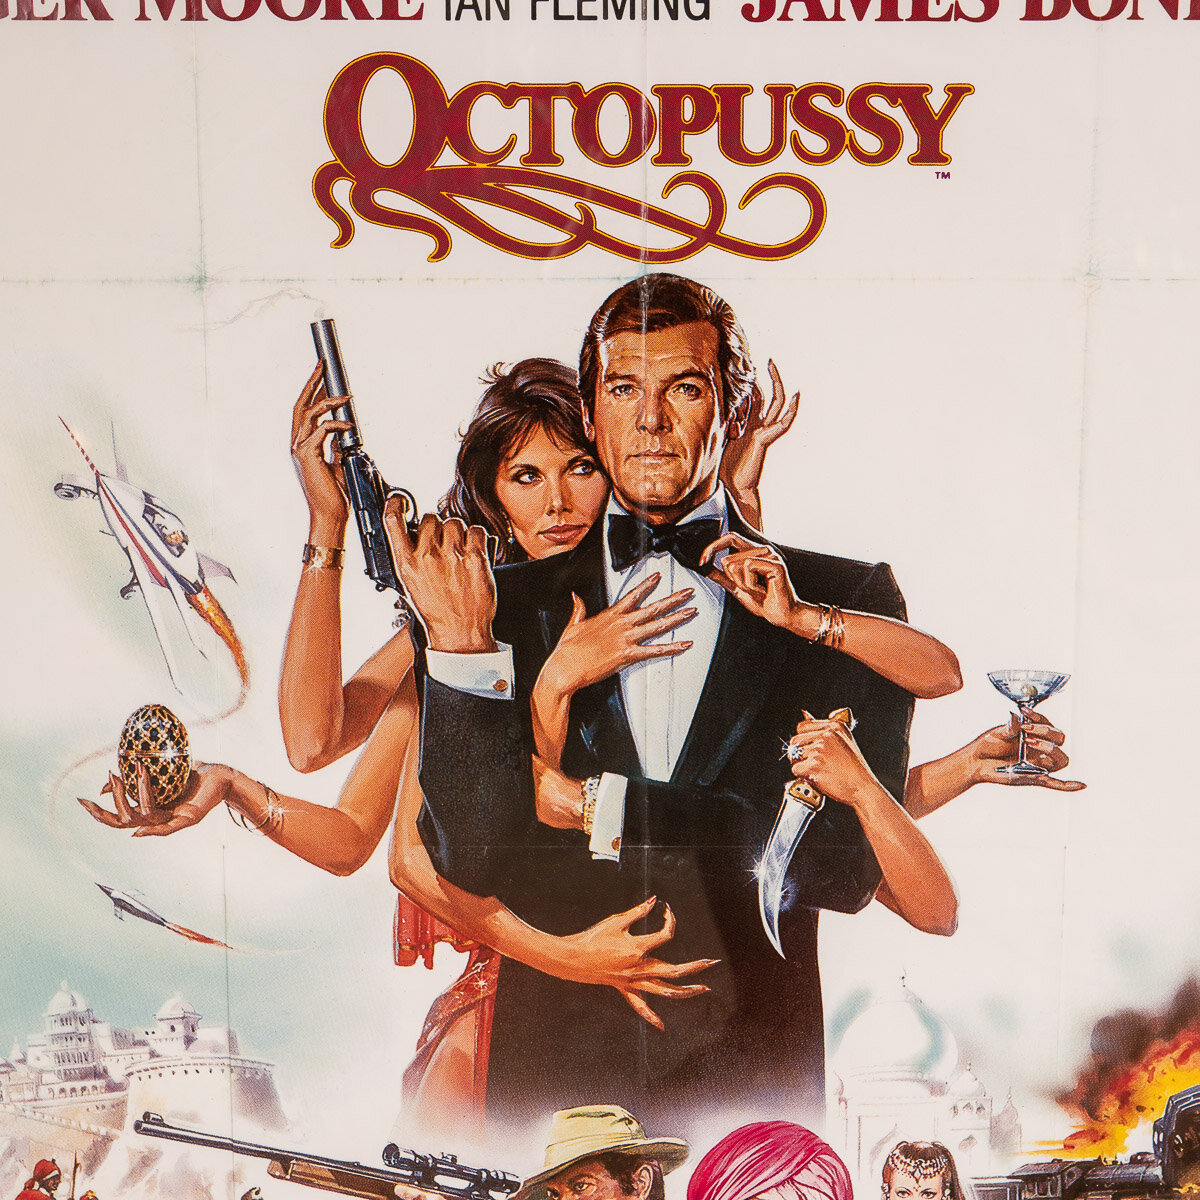 ORIGINAL FRENCH RELEASE JAMES BOND 'OCTOPUSSY' POSTER c.1983 — Pushkin ...